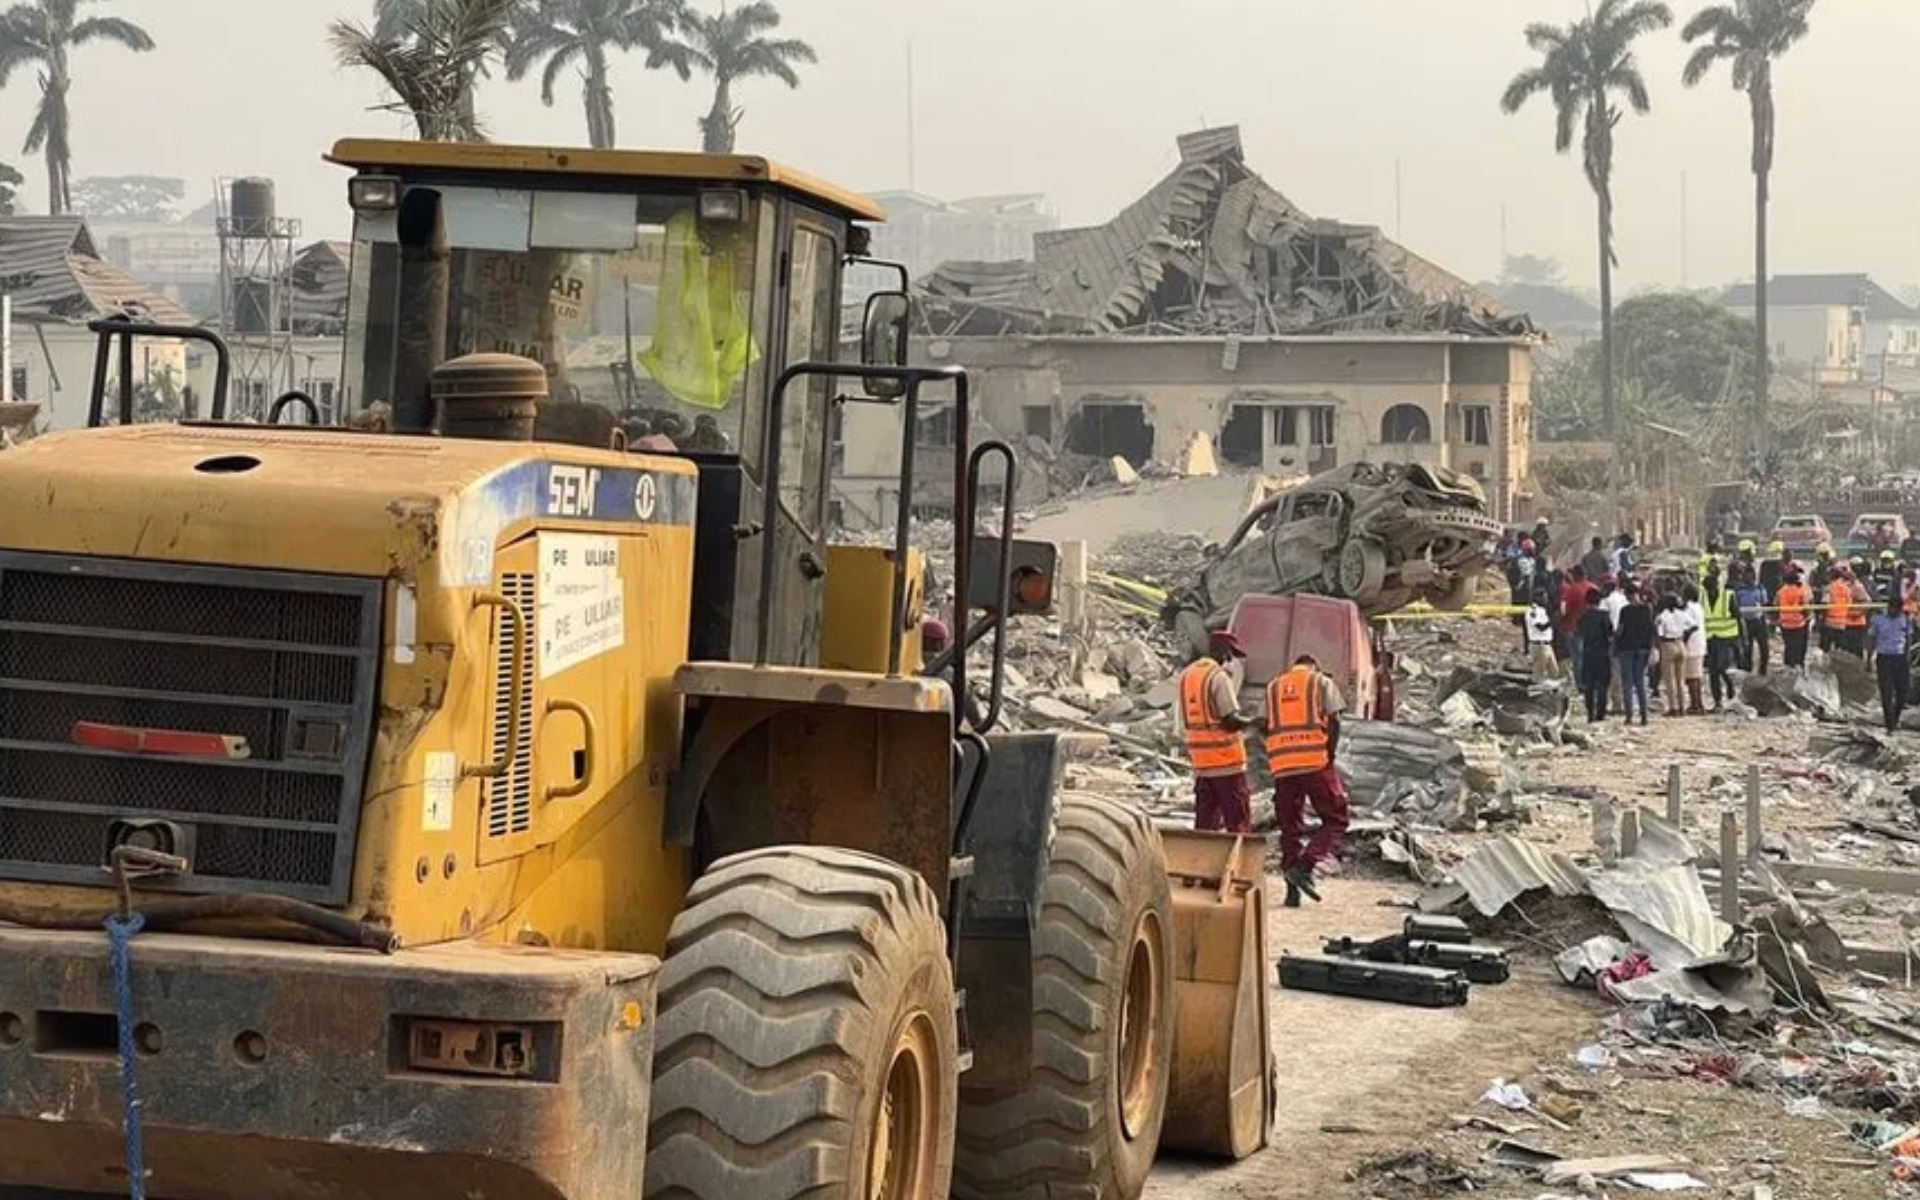 Ibadan Explosion: How can we rethink disaster preparedness and responsiveness